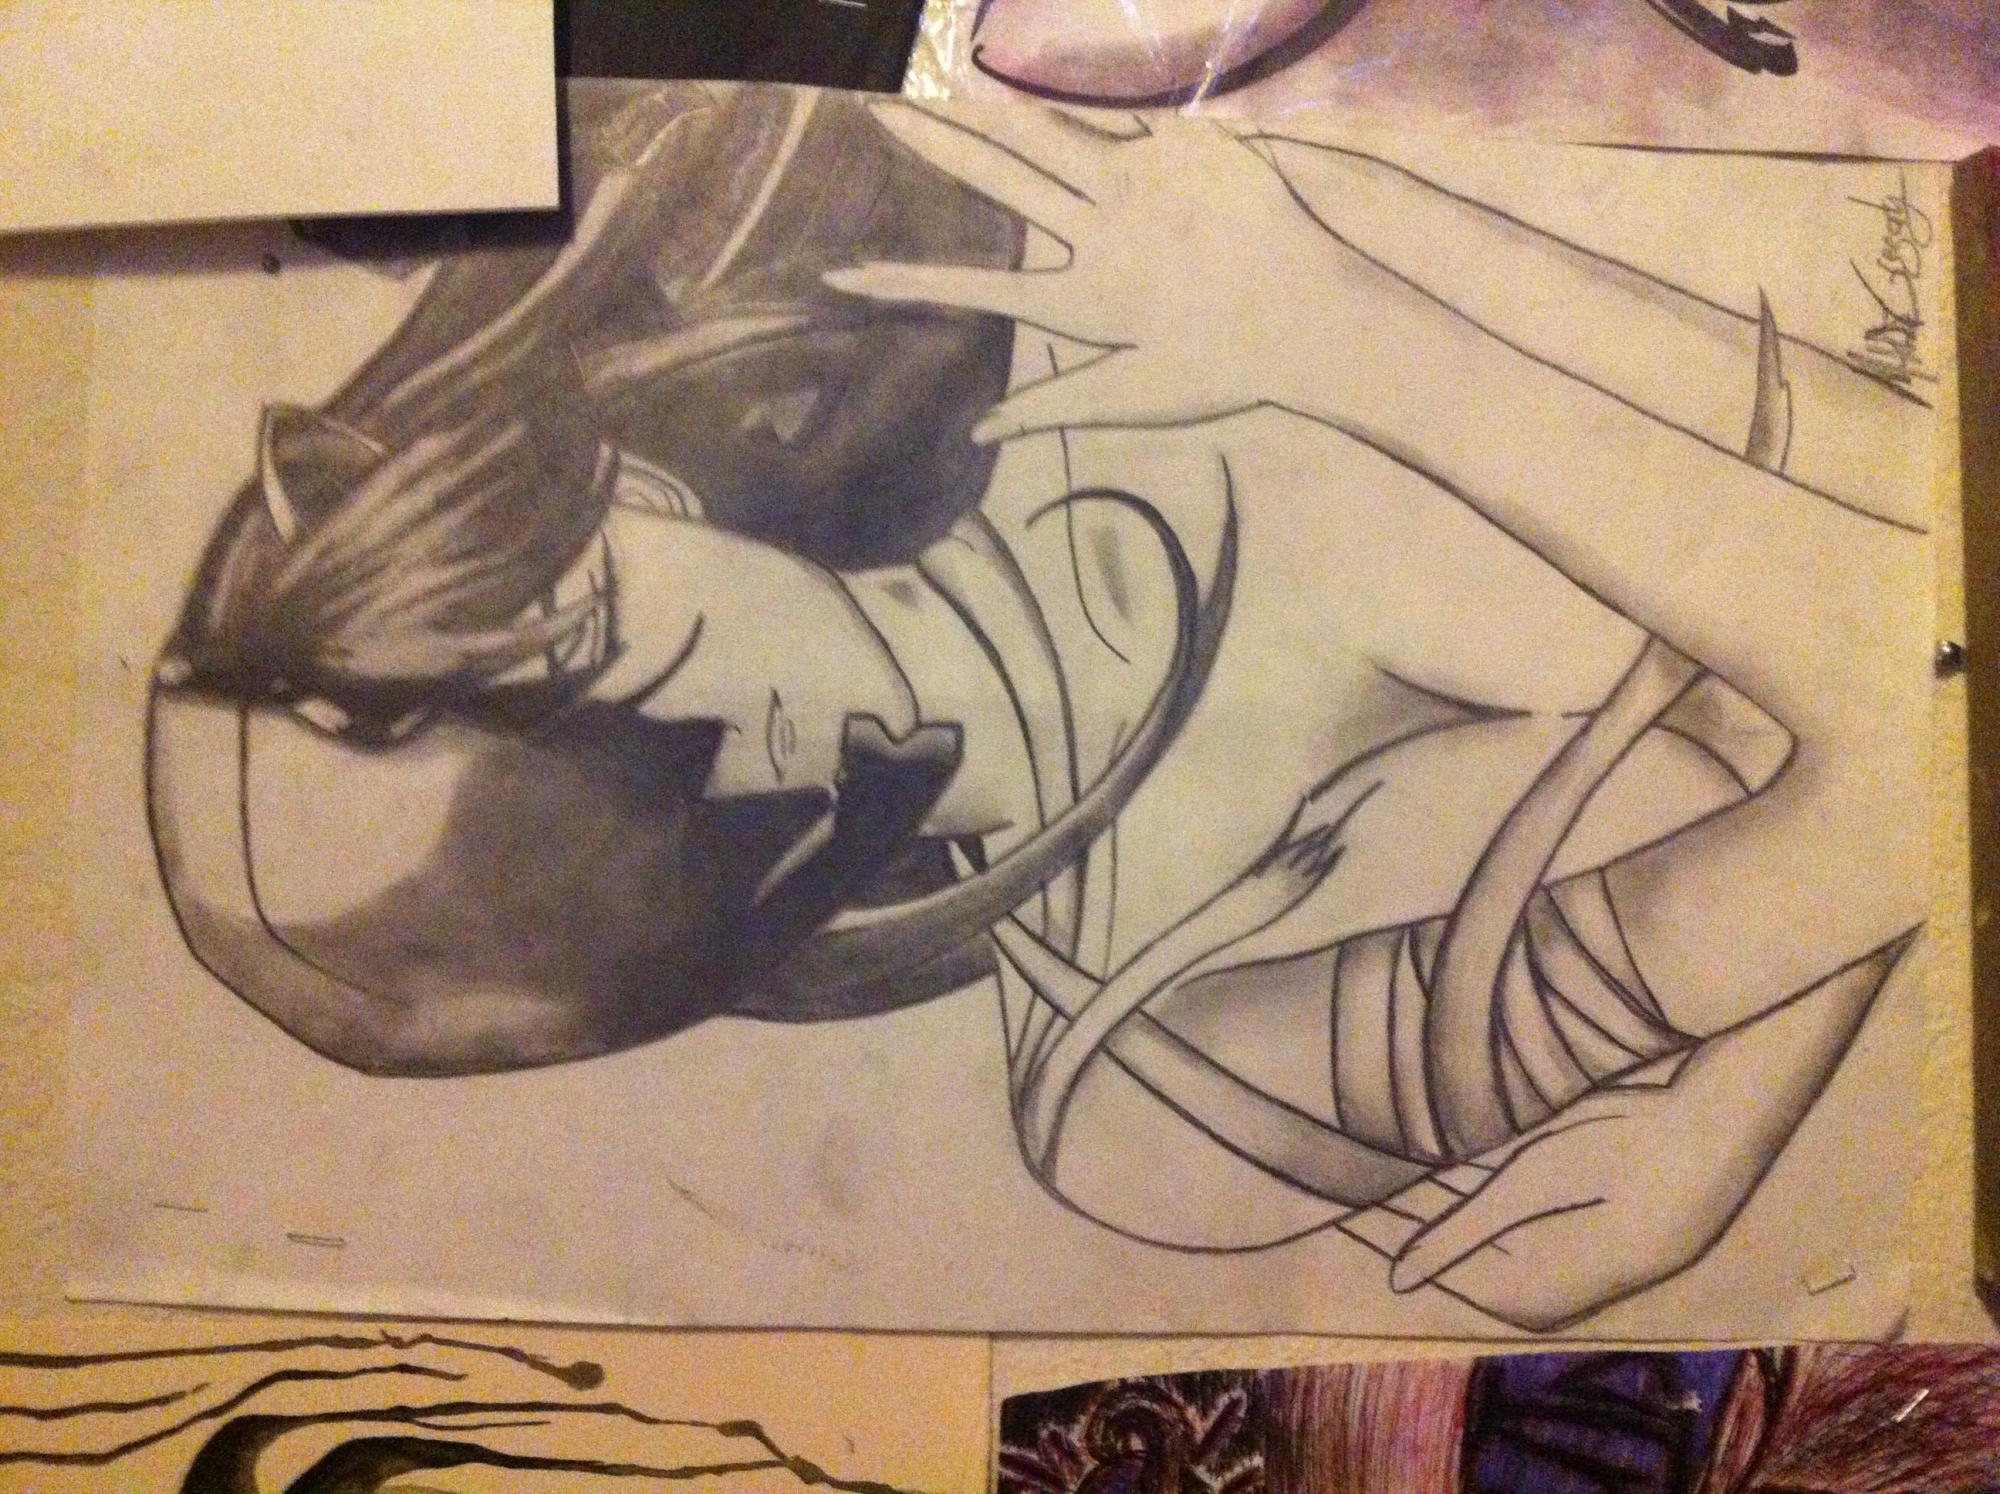 My pencil drawing of Lucy from elfin lied :)